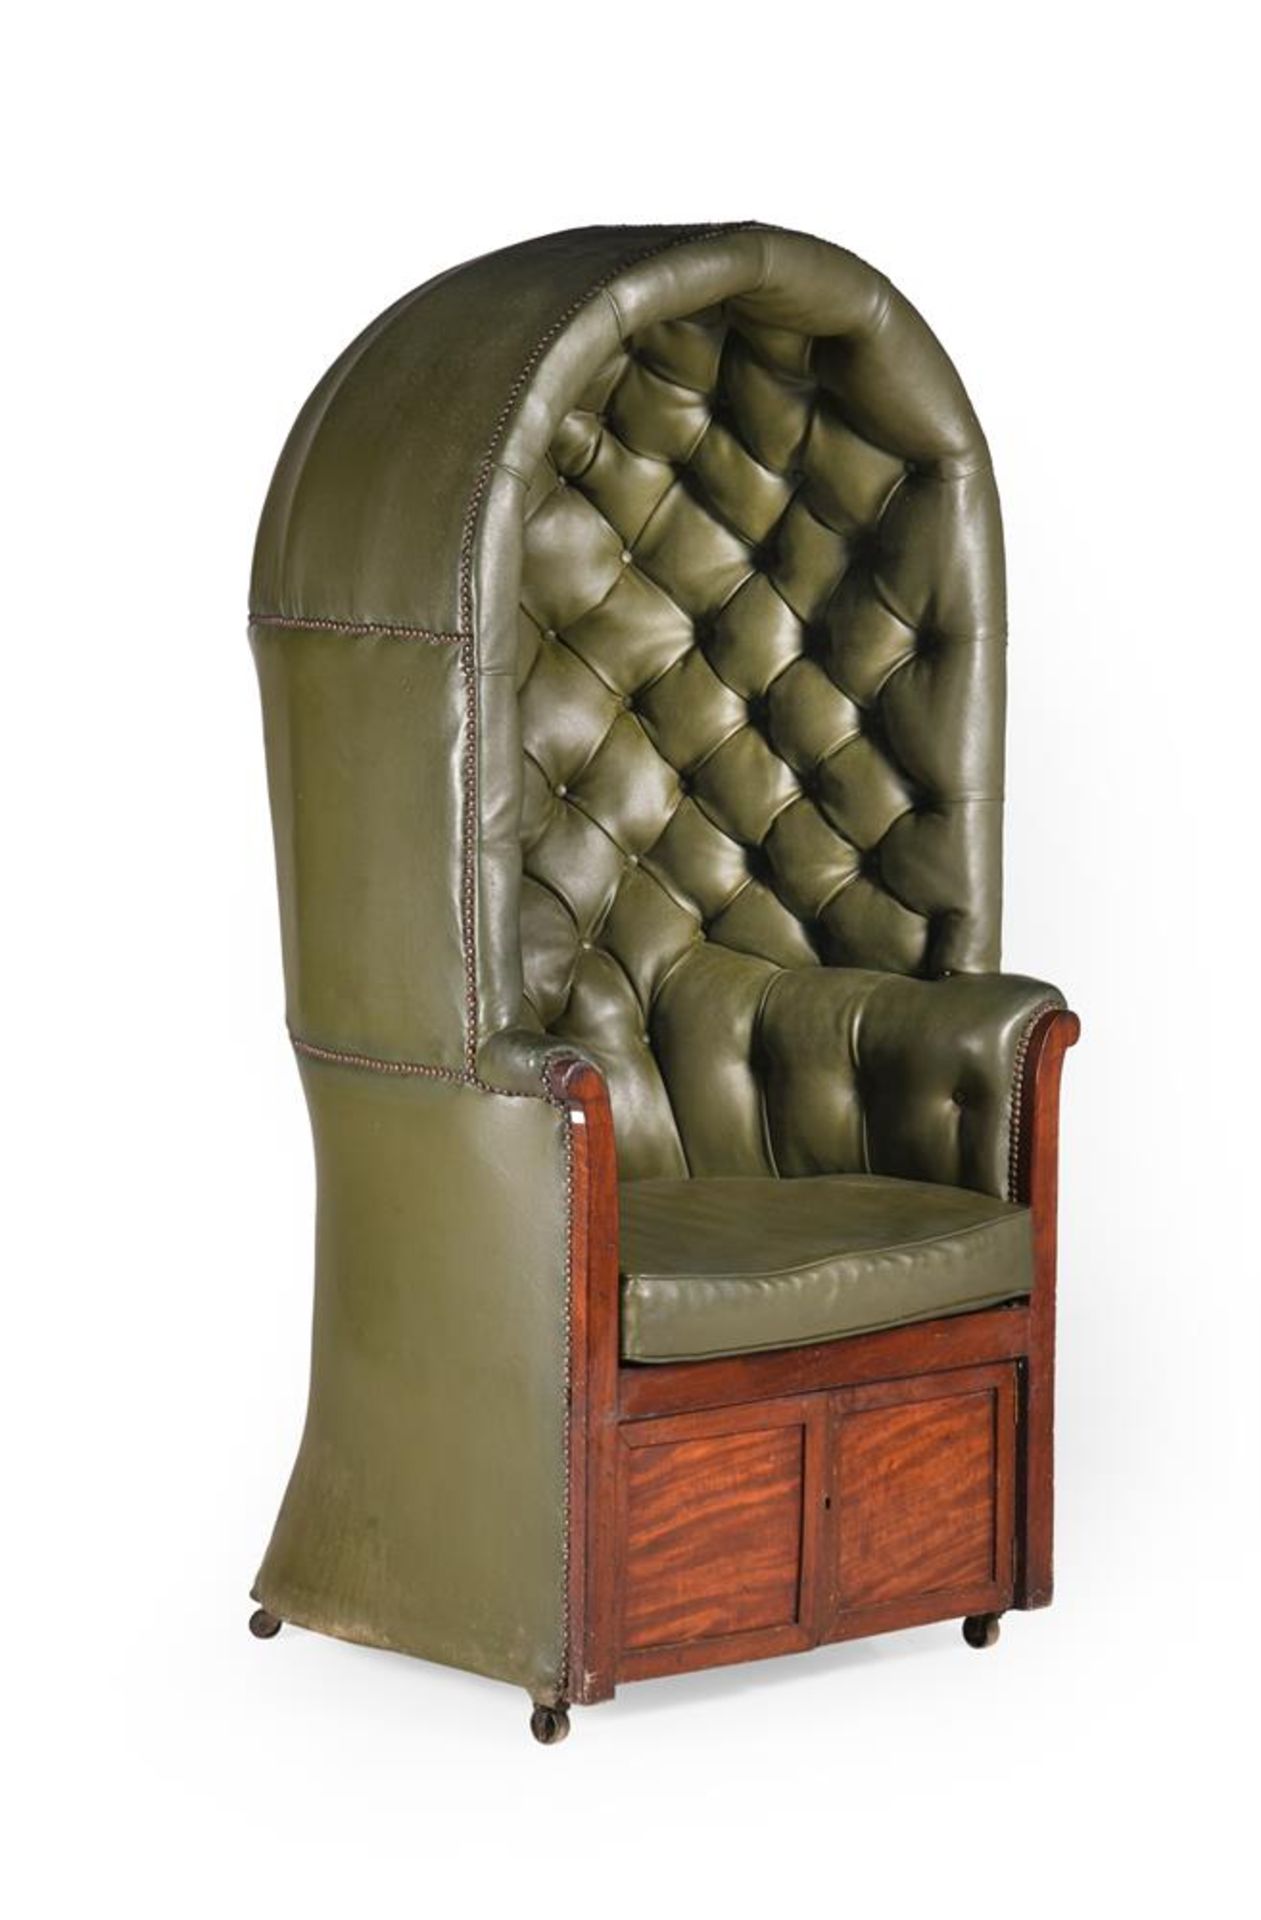 A LATE REGENCY CLOSE NAILED FAUX LEATHER UPHOLSTERED PORTER'S CHAIR, EARLY 19TH CENTURY